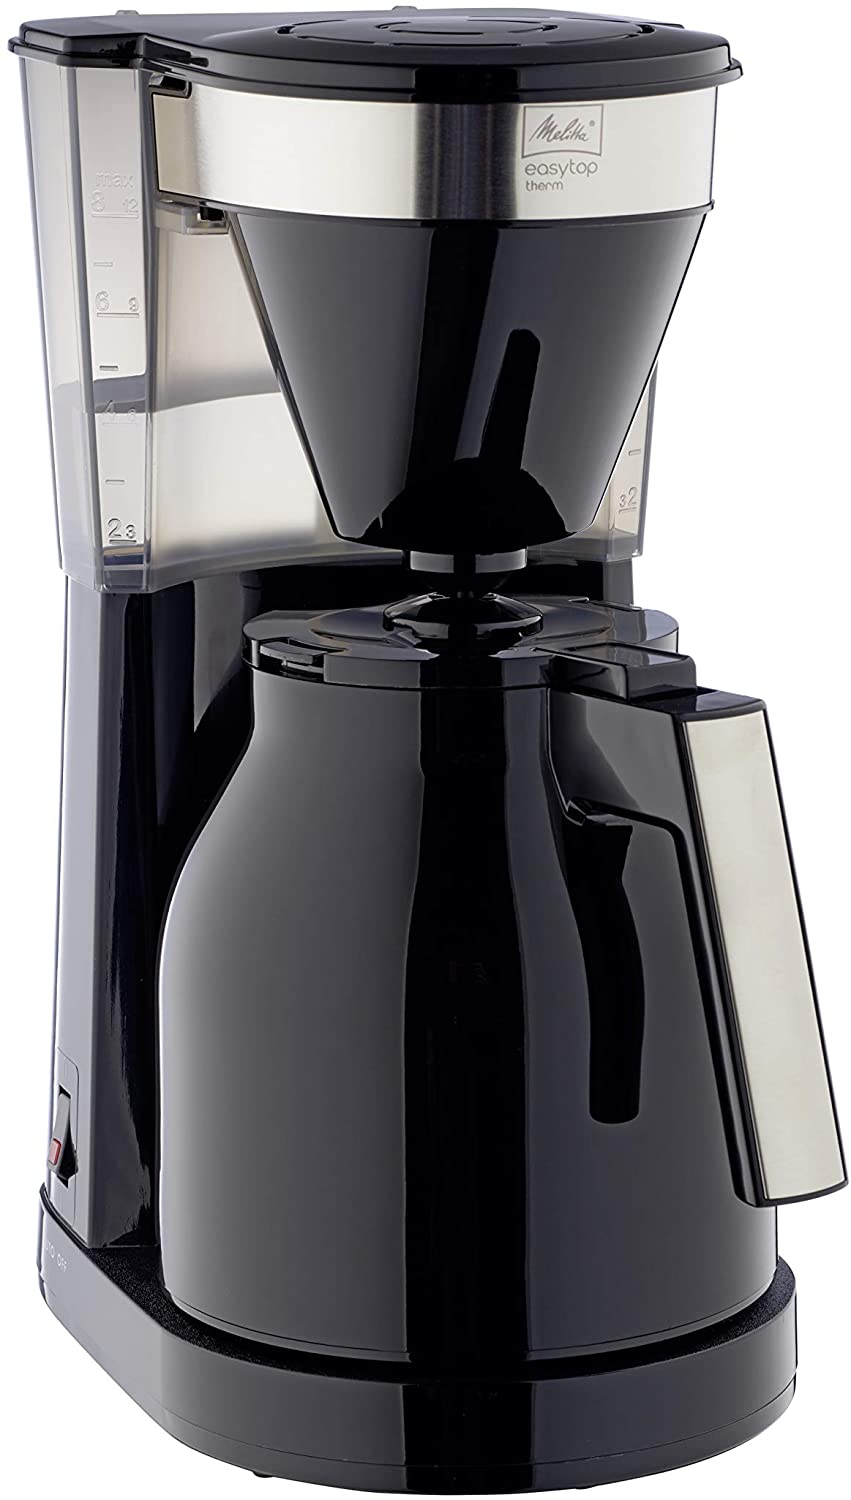 Melitta 1023-08 EasyTop Therm Filter Coffee Machine, Stainless Steel, Plastic, Black